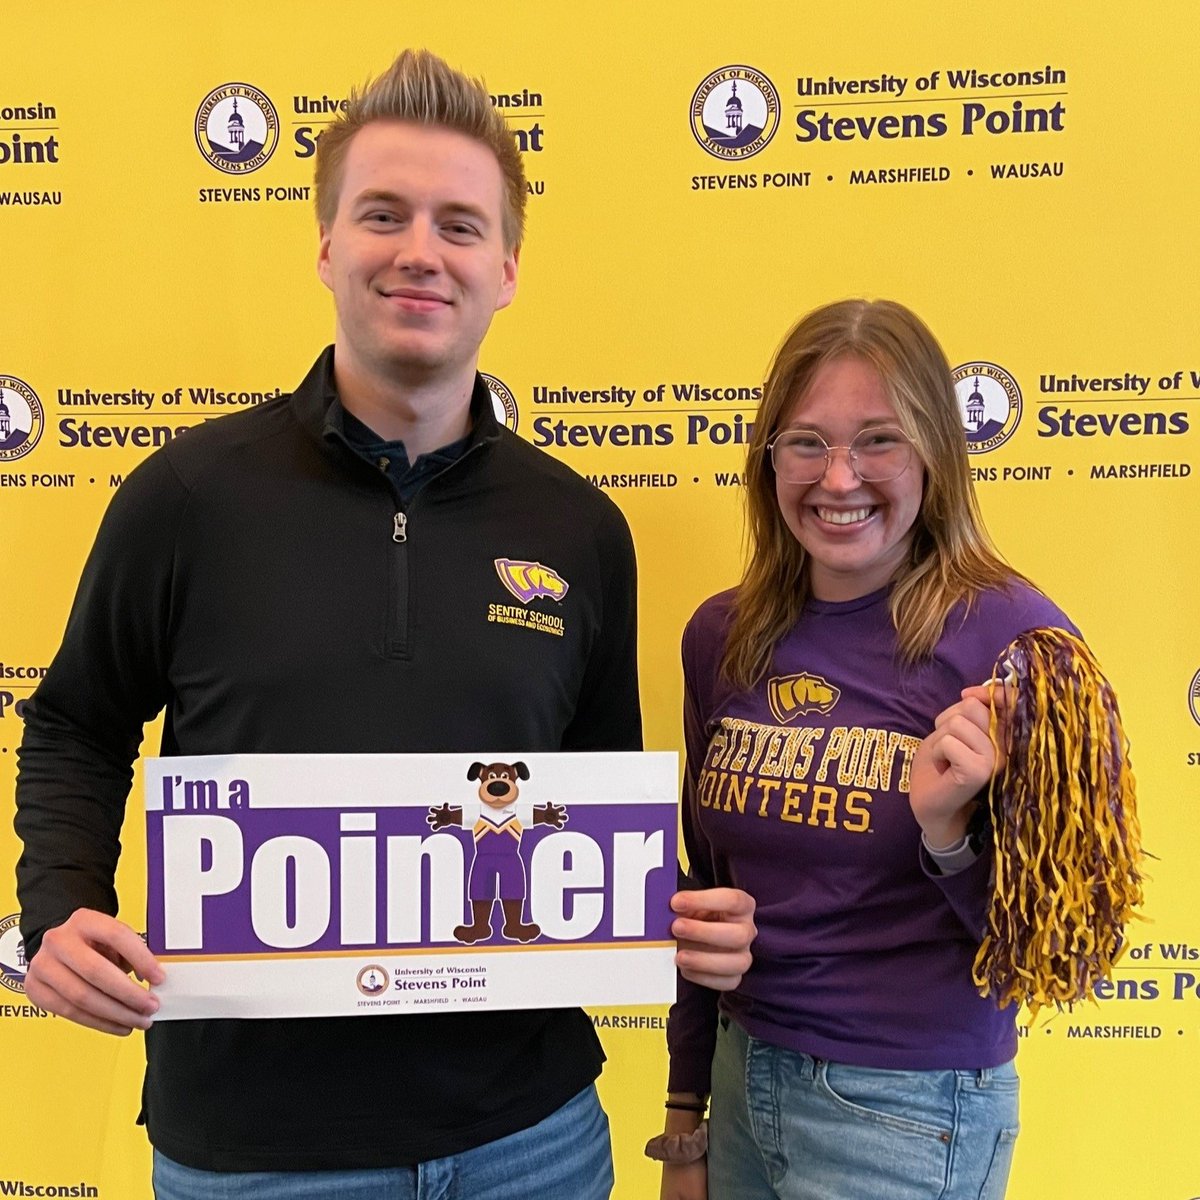 #Pointers, it's the Day of Giving and the last day to participate in the Chancellor's Photo Challenge! For every photo with the #UWSPGivesBack, Chancellor Gibson will donate $1 towards student scholarships! Tag us in your photos to be featured! #UWSP